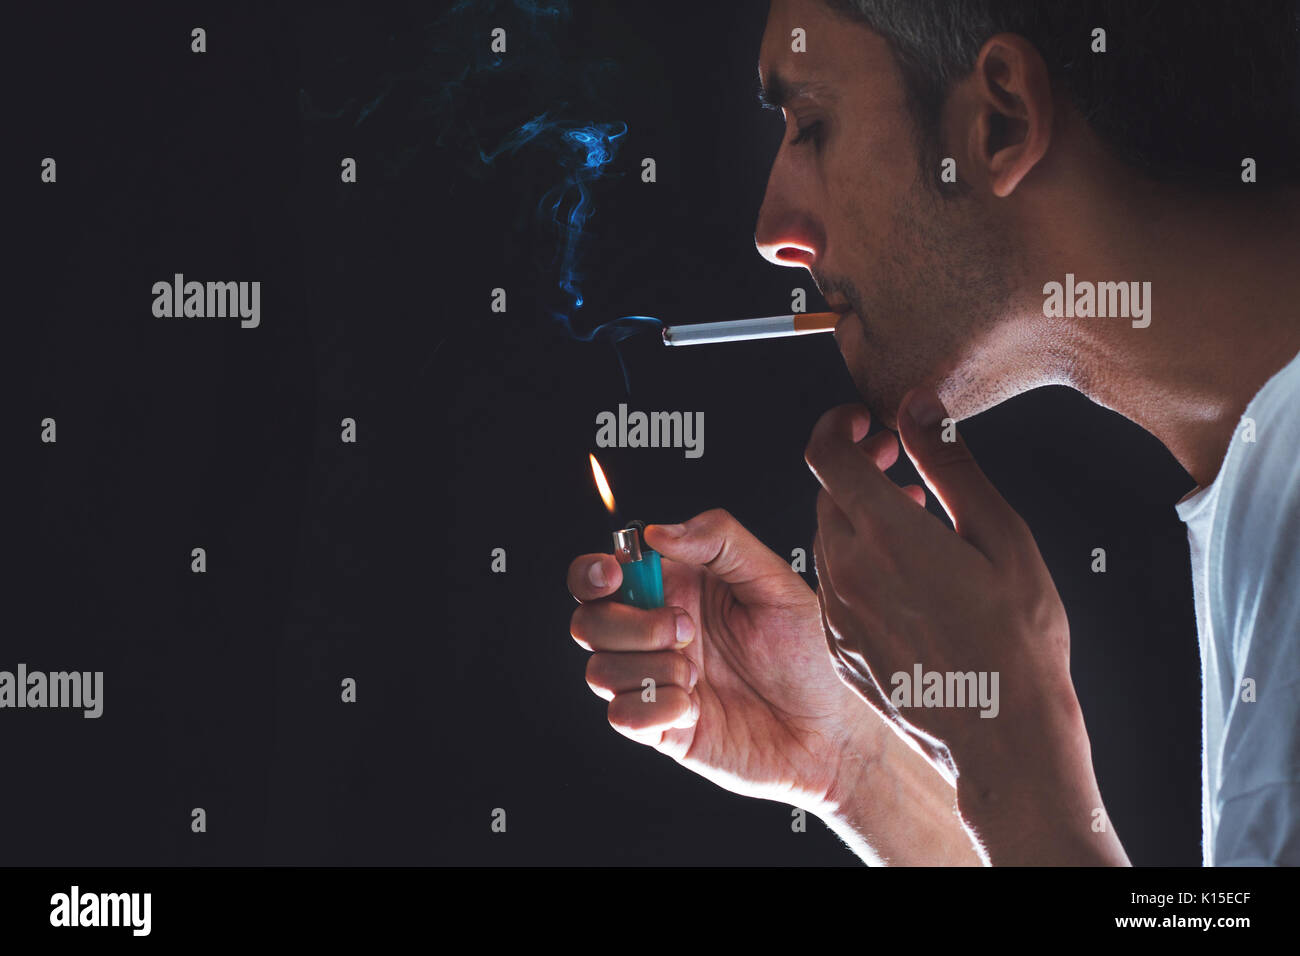 close-up of a man lighting a cigarette in a dark atmosphere Stock Photo